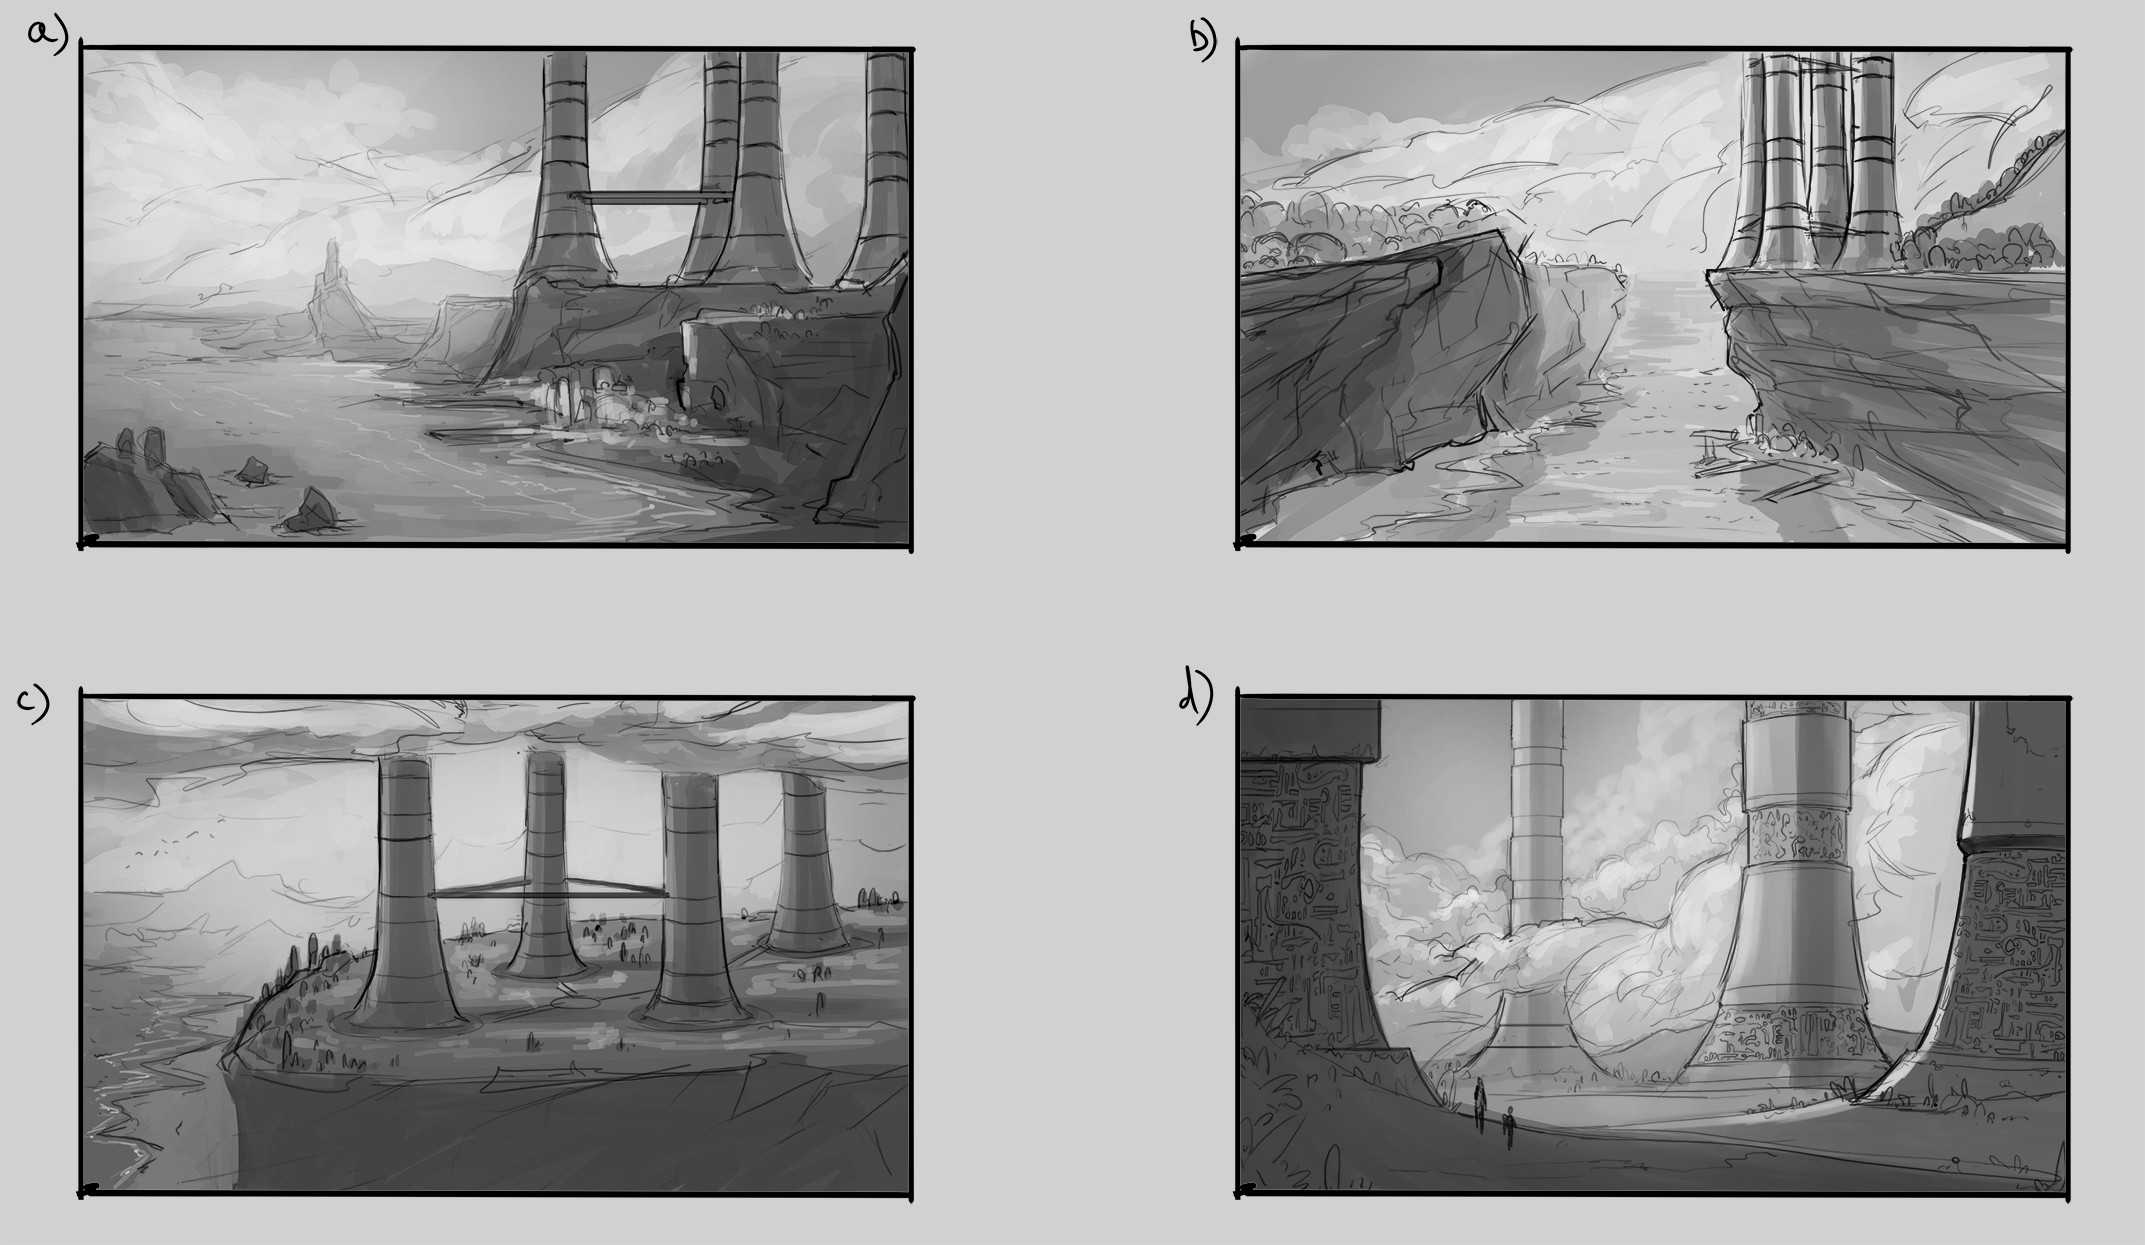 Composition thumbs